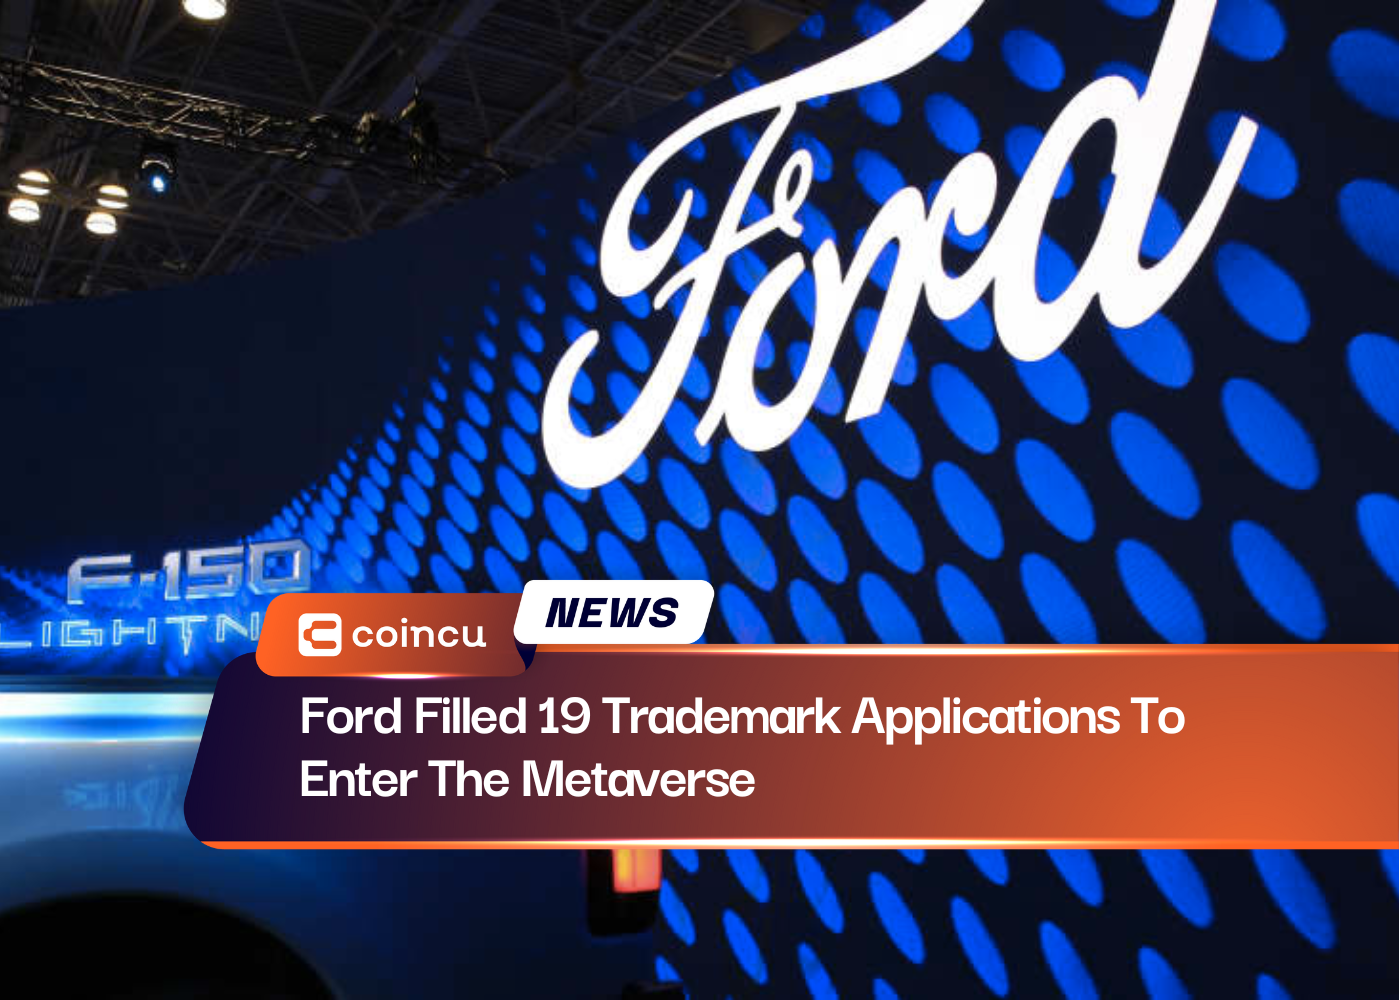 Ford Filled 19 Trademark Applications To Enter The Metaverse